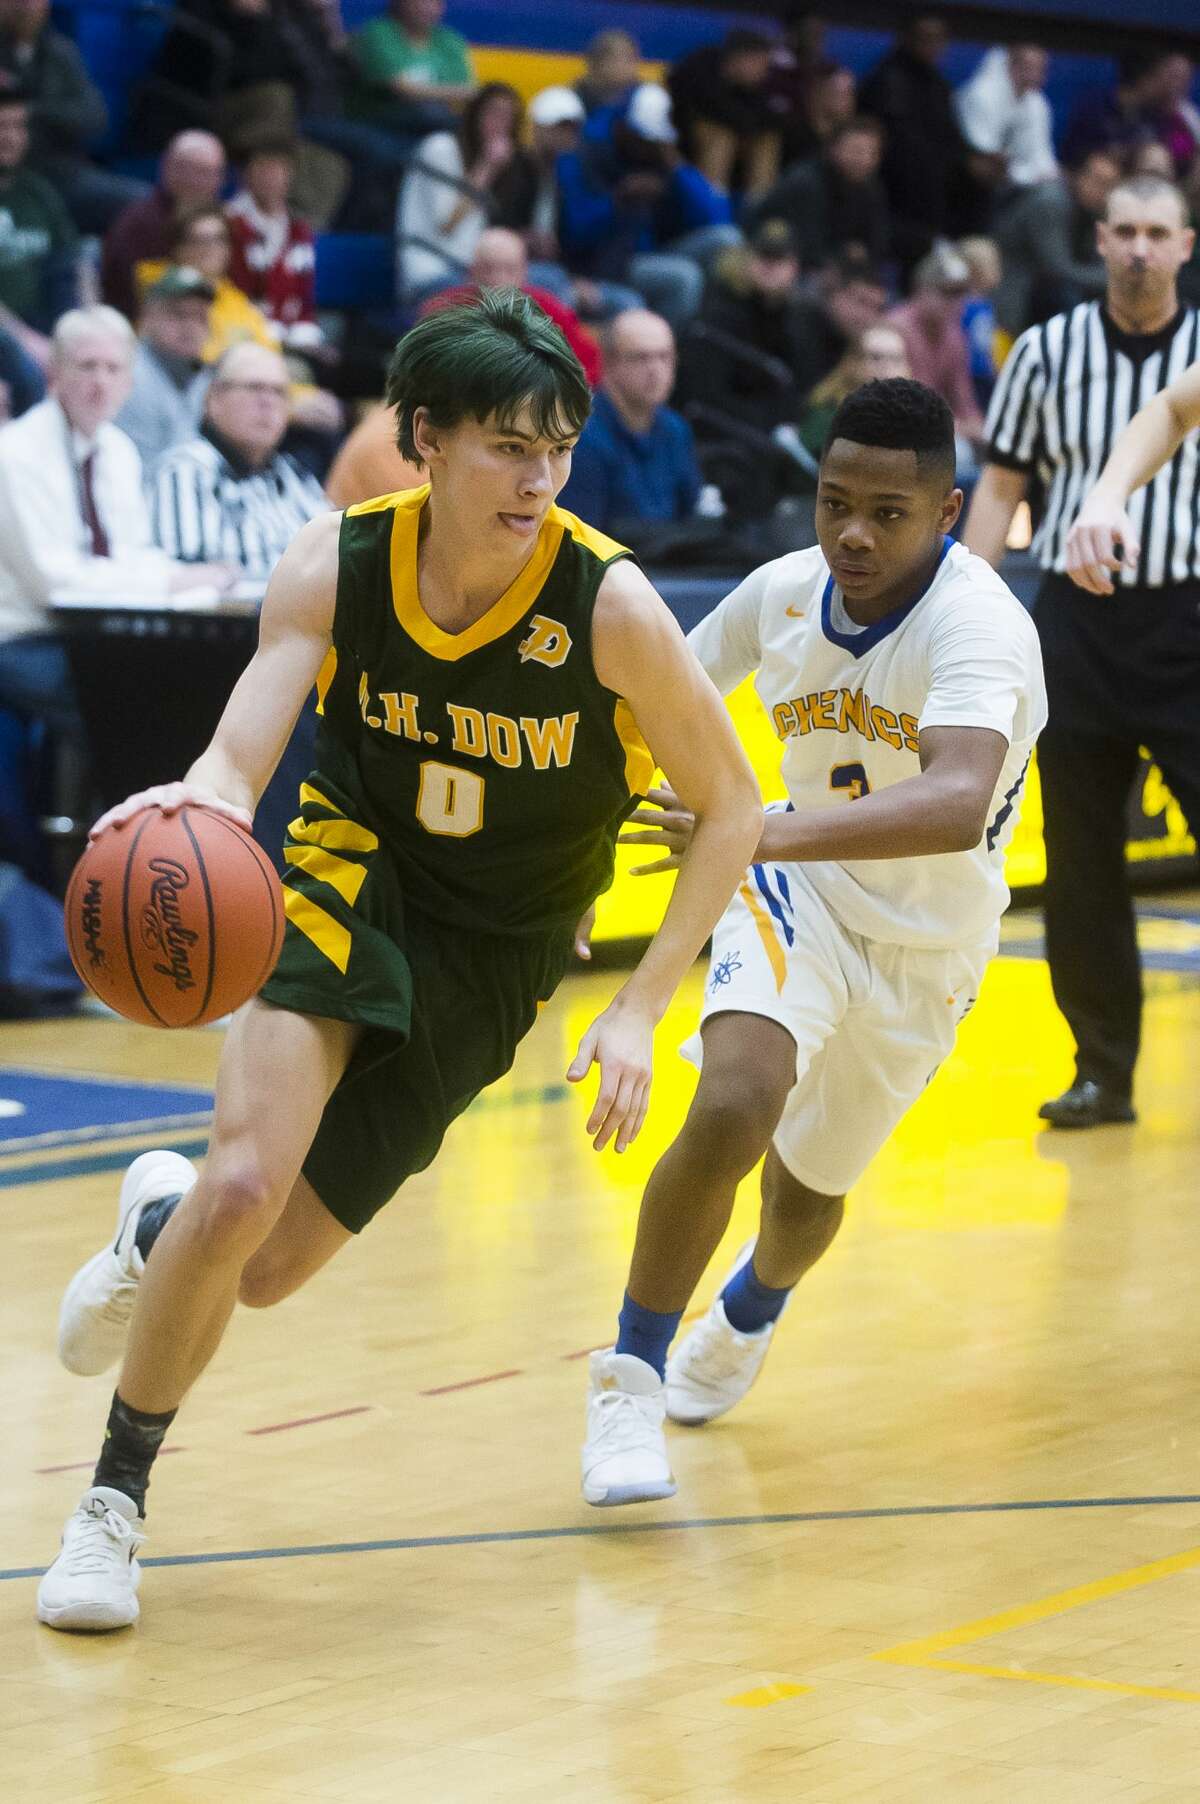 Dow's Drew Huber dribbles toward the basket during the Chargers' game against Midland Thursday, Dec. 19, 2019 at Midland High School. (Katy Kildee/kkildee@mdn.net)